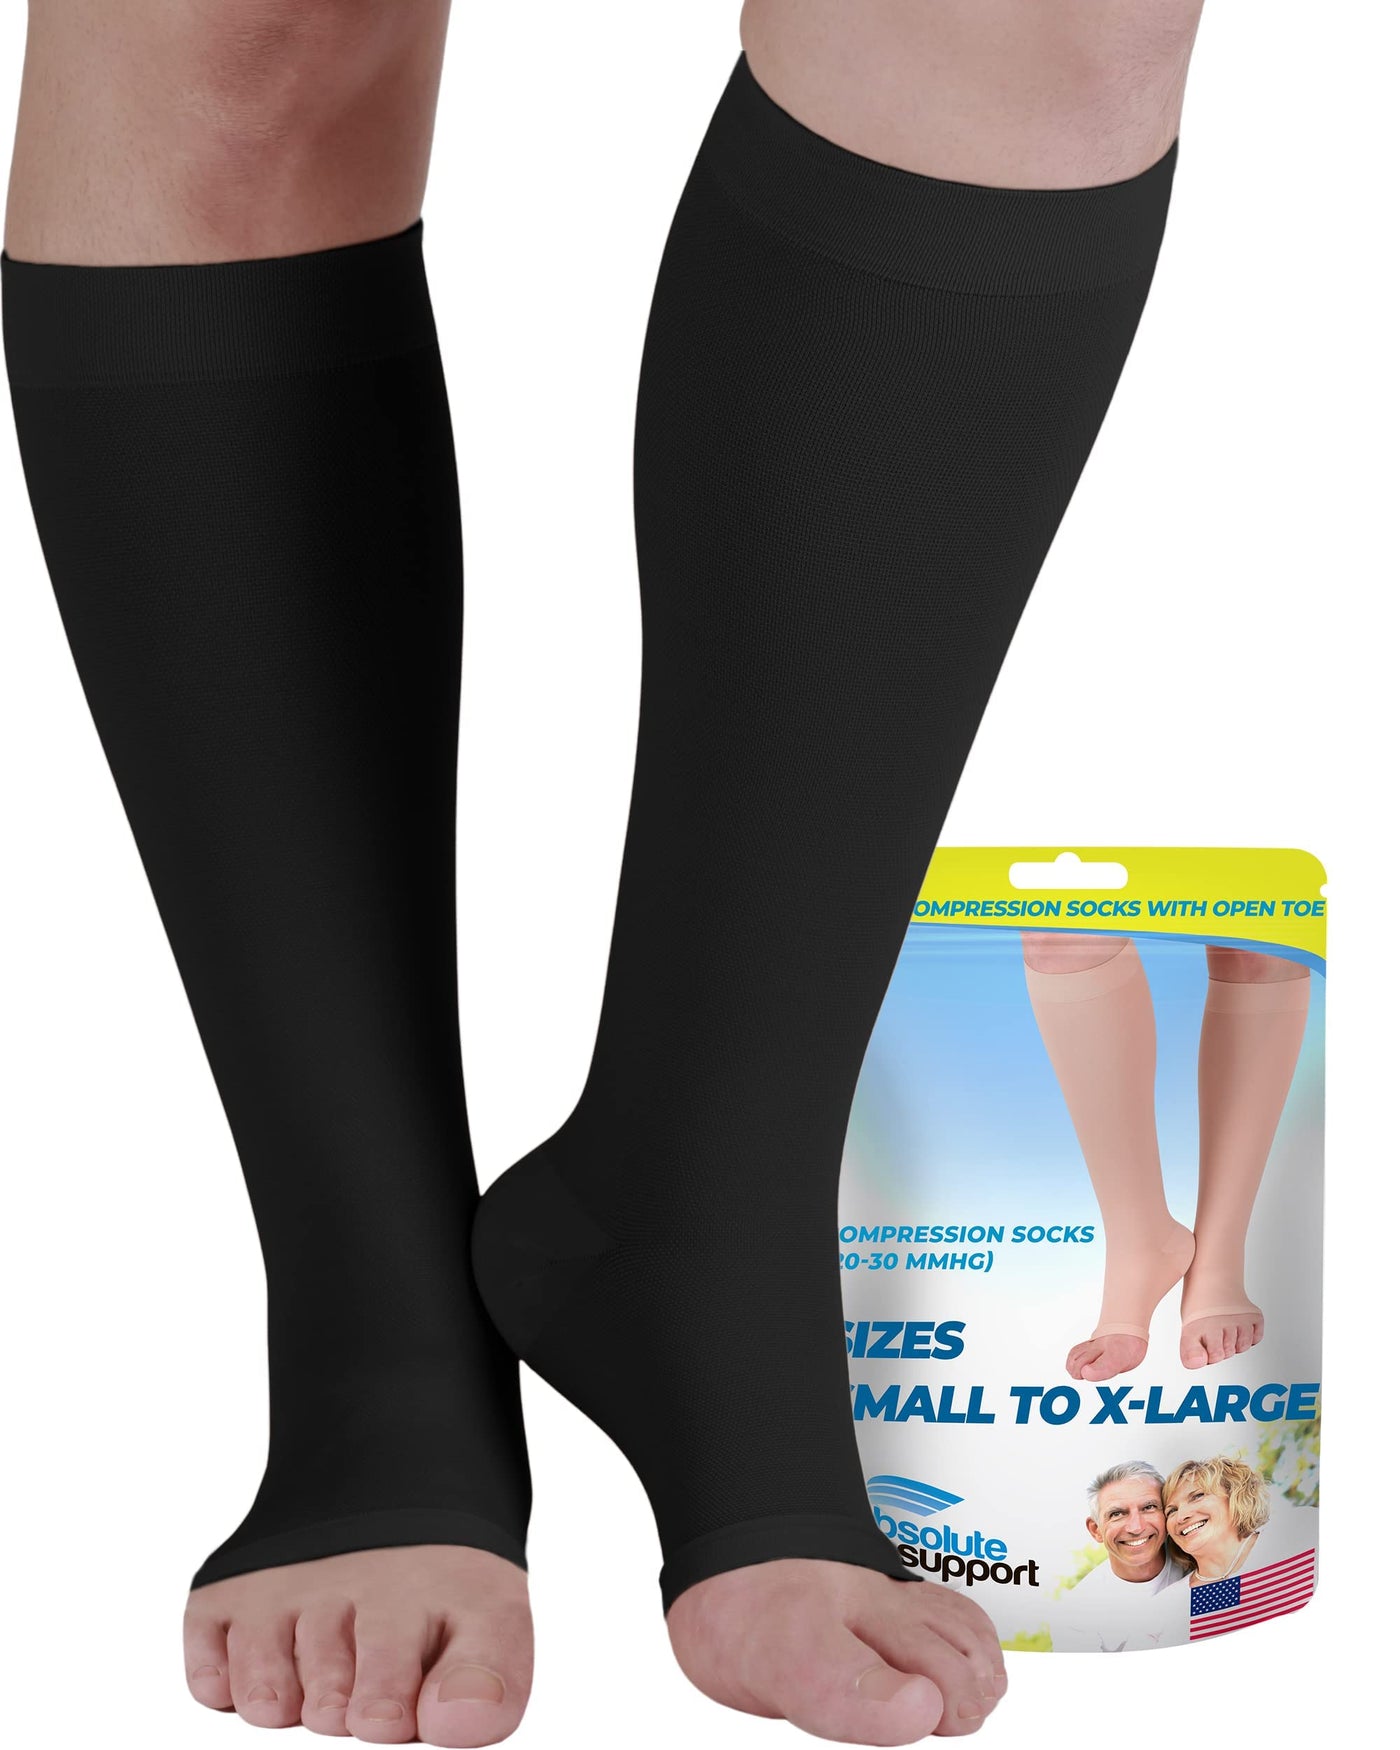 Compression Leggings for Women 20-30mmHg by Absolute Support - Black, Small